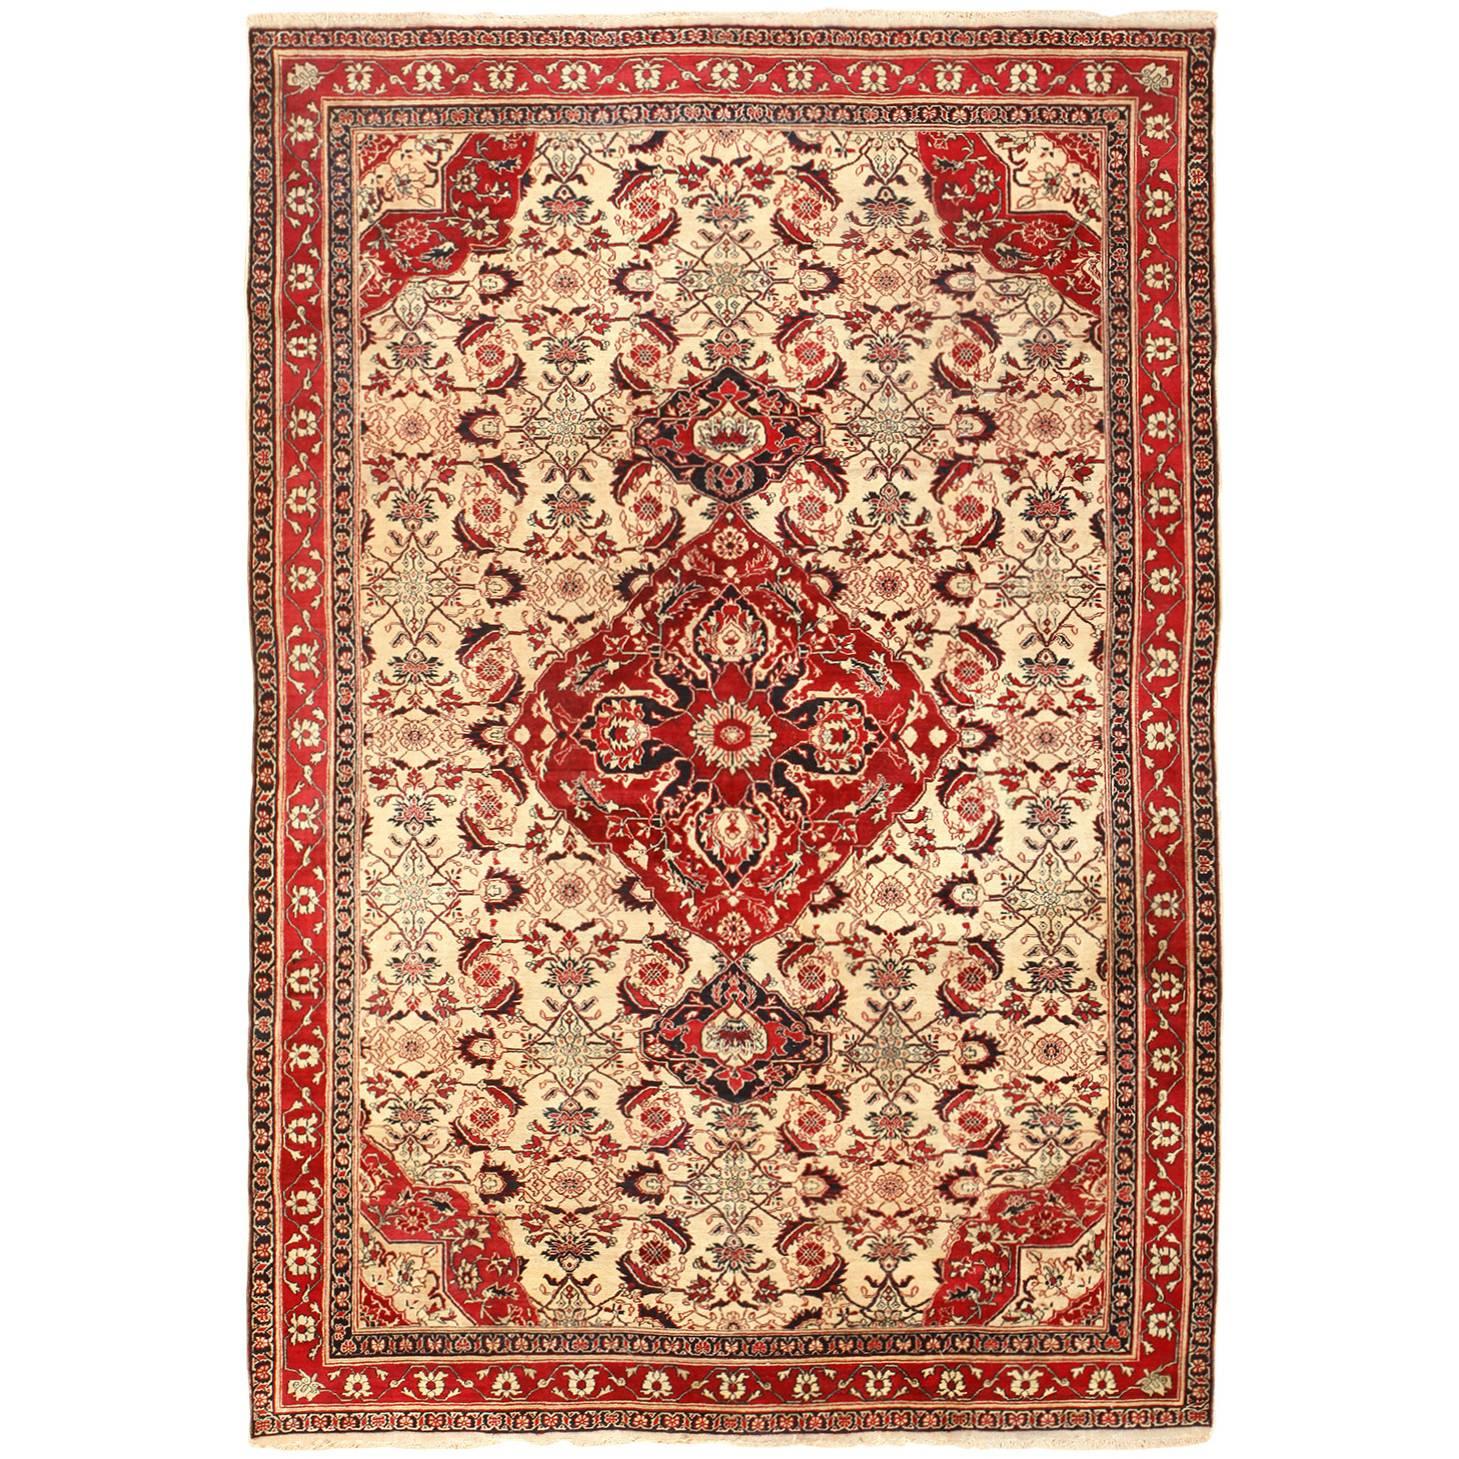 Fine Antique Indian Agra Rug. Size: 6 ft x 8 ft 9 in (1.83 m x 2.67 m)